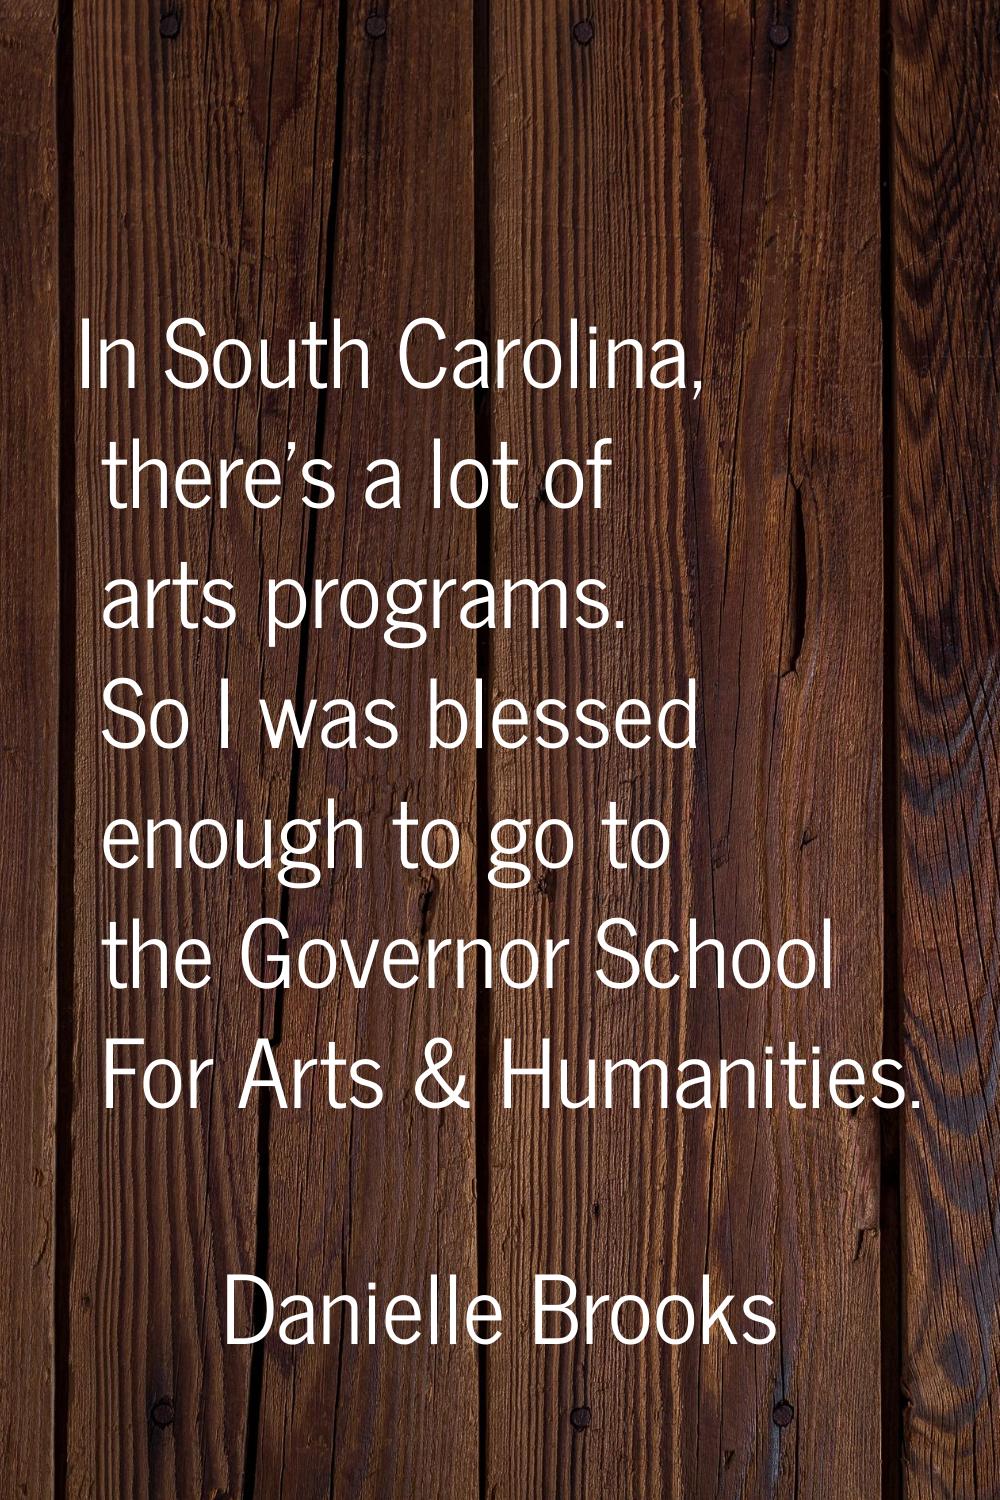 In South Carolina, there's a lot of arts programs. So I was blessed enough to go to the Governor Sc